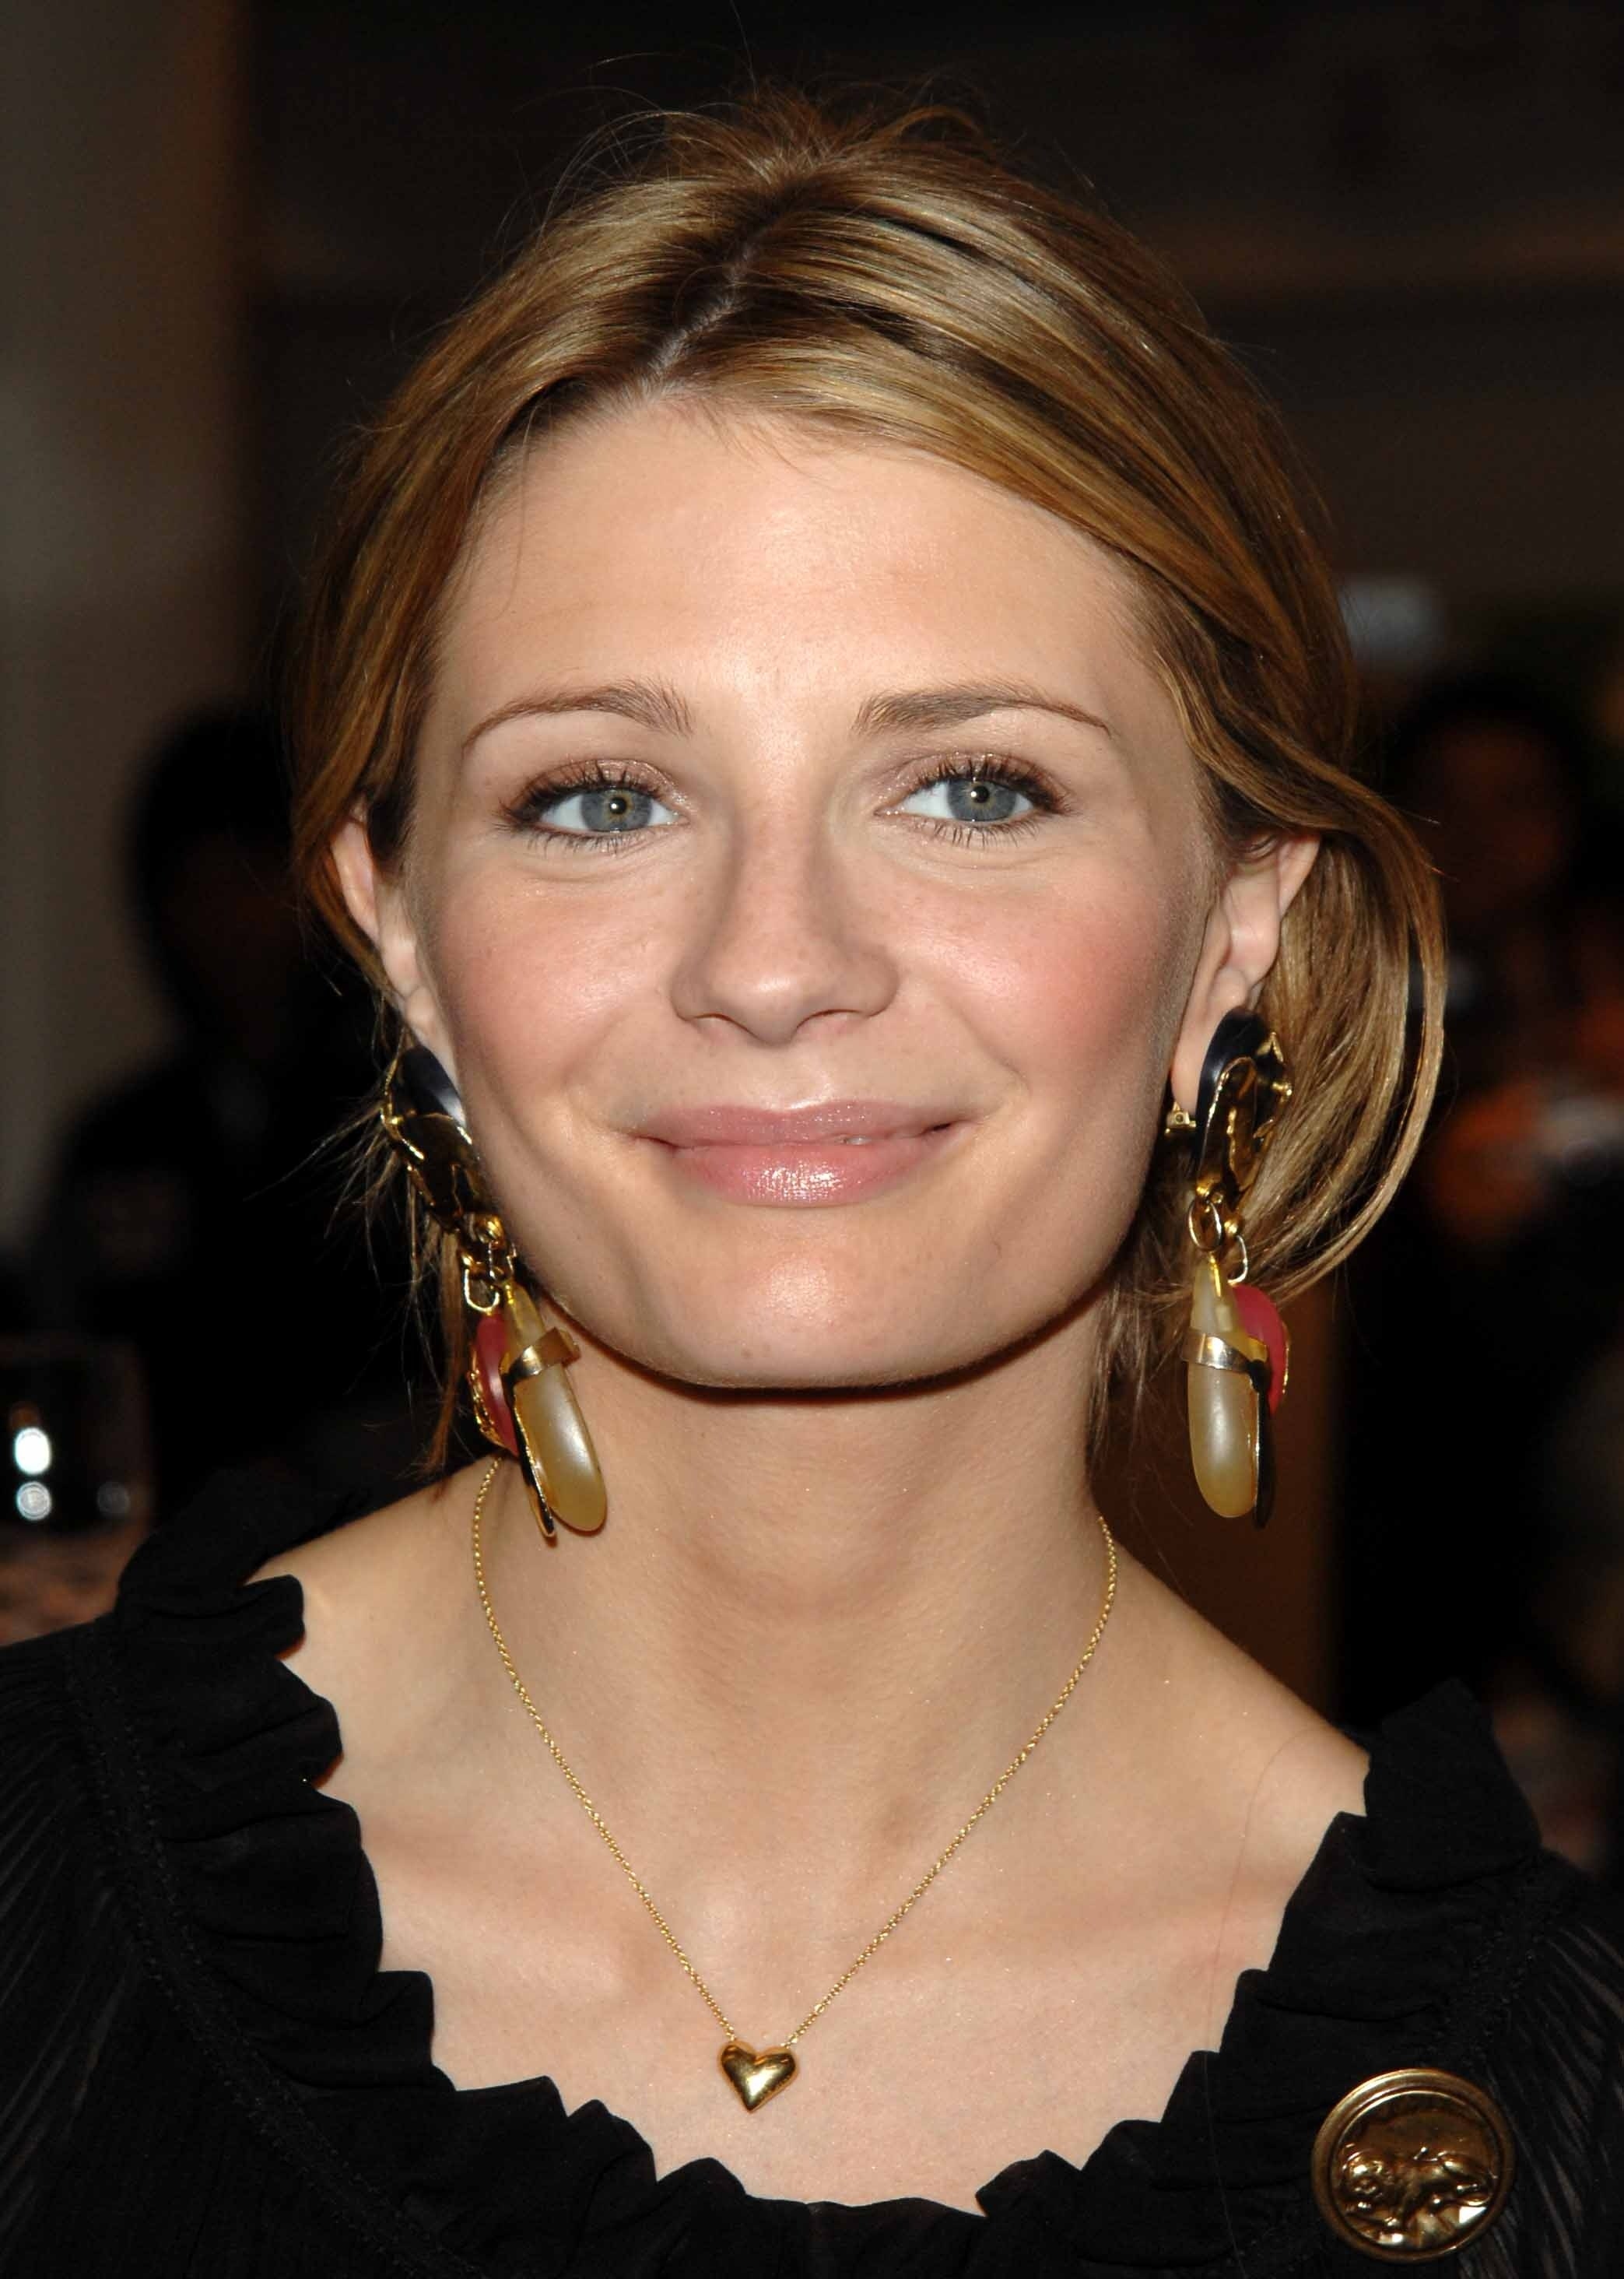 mischa barton smiling at an event